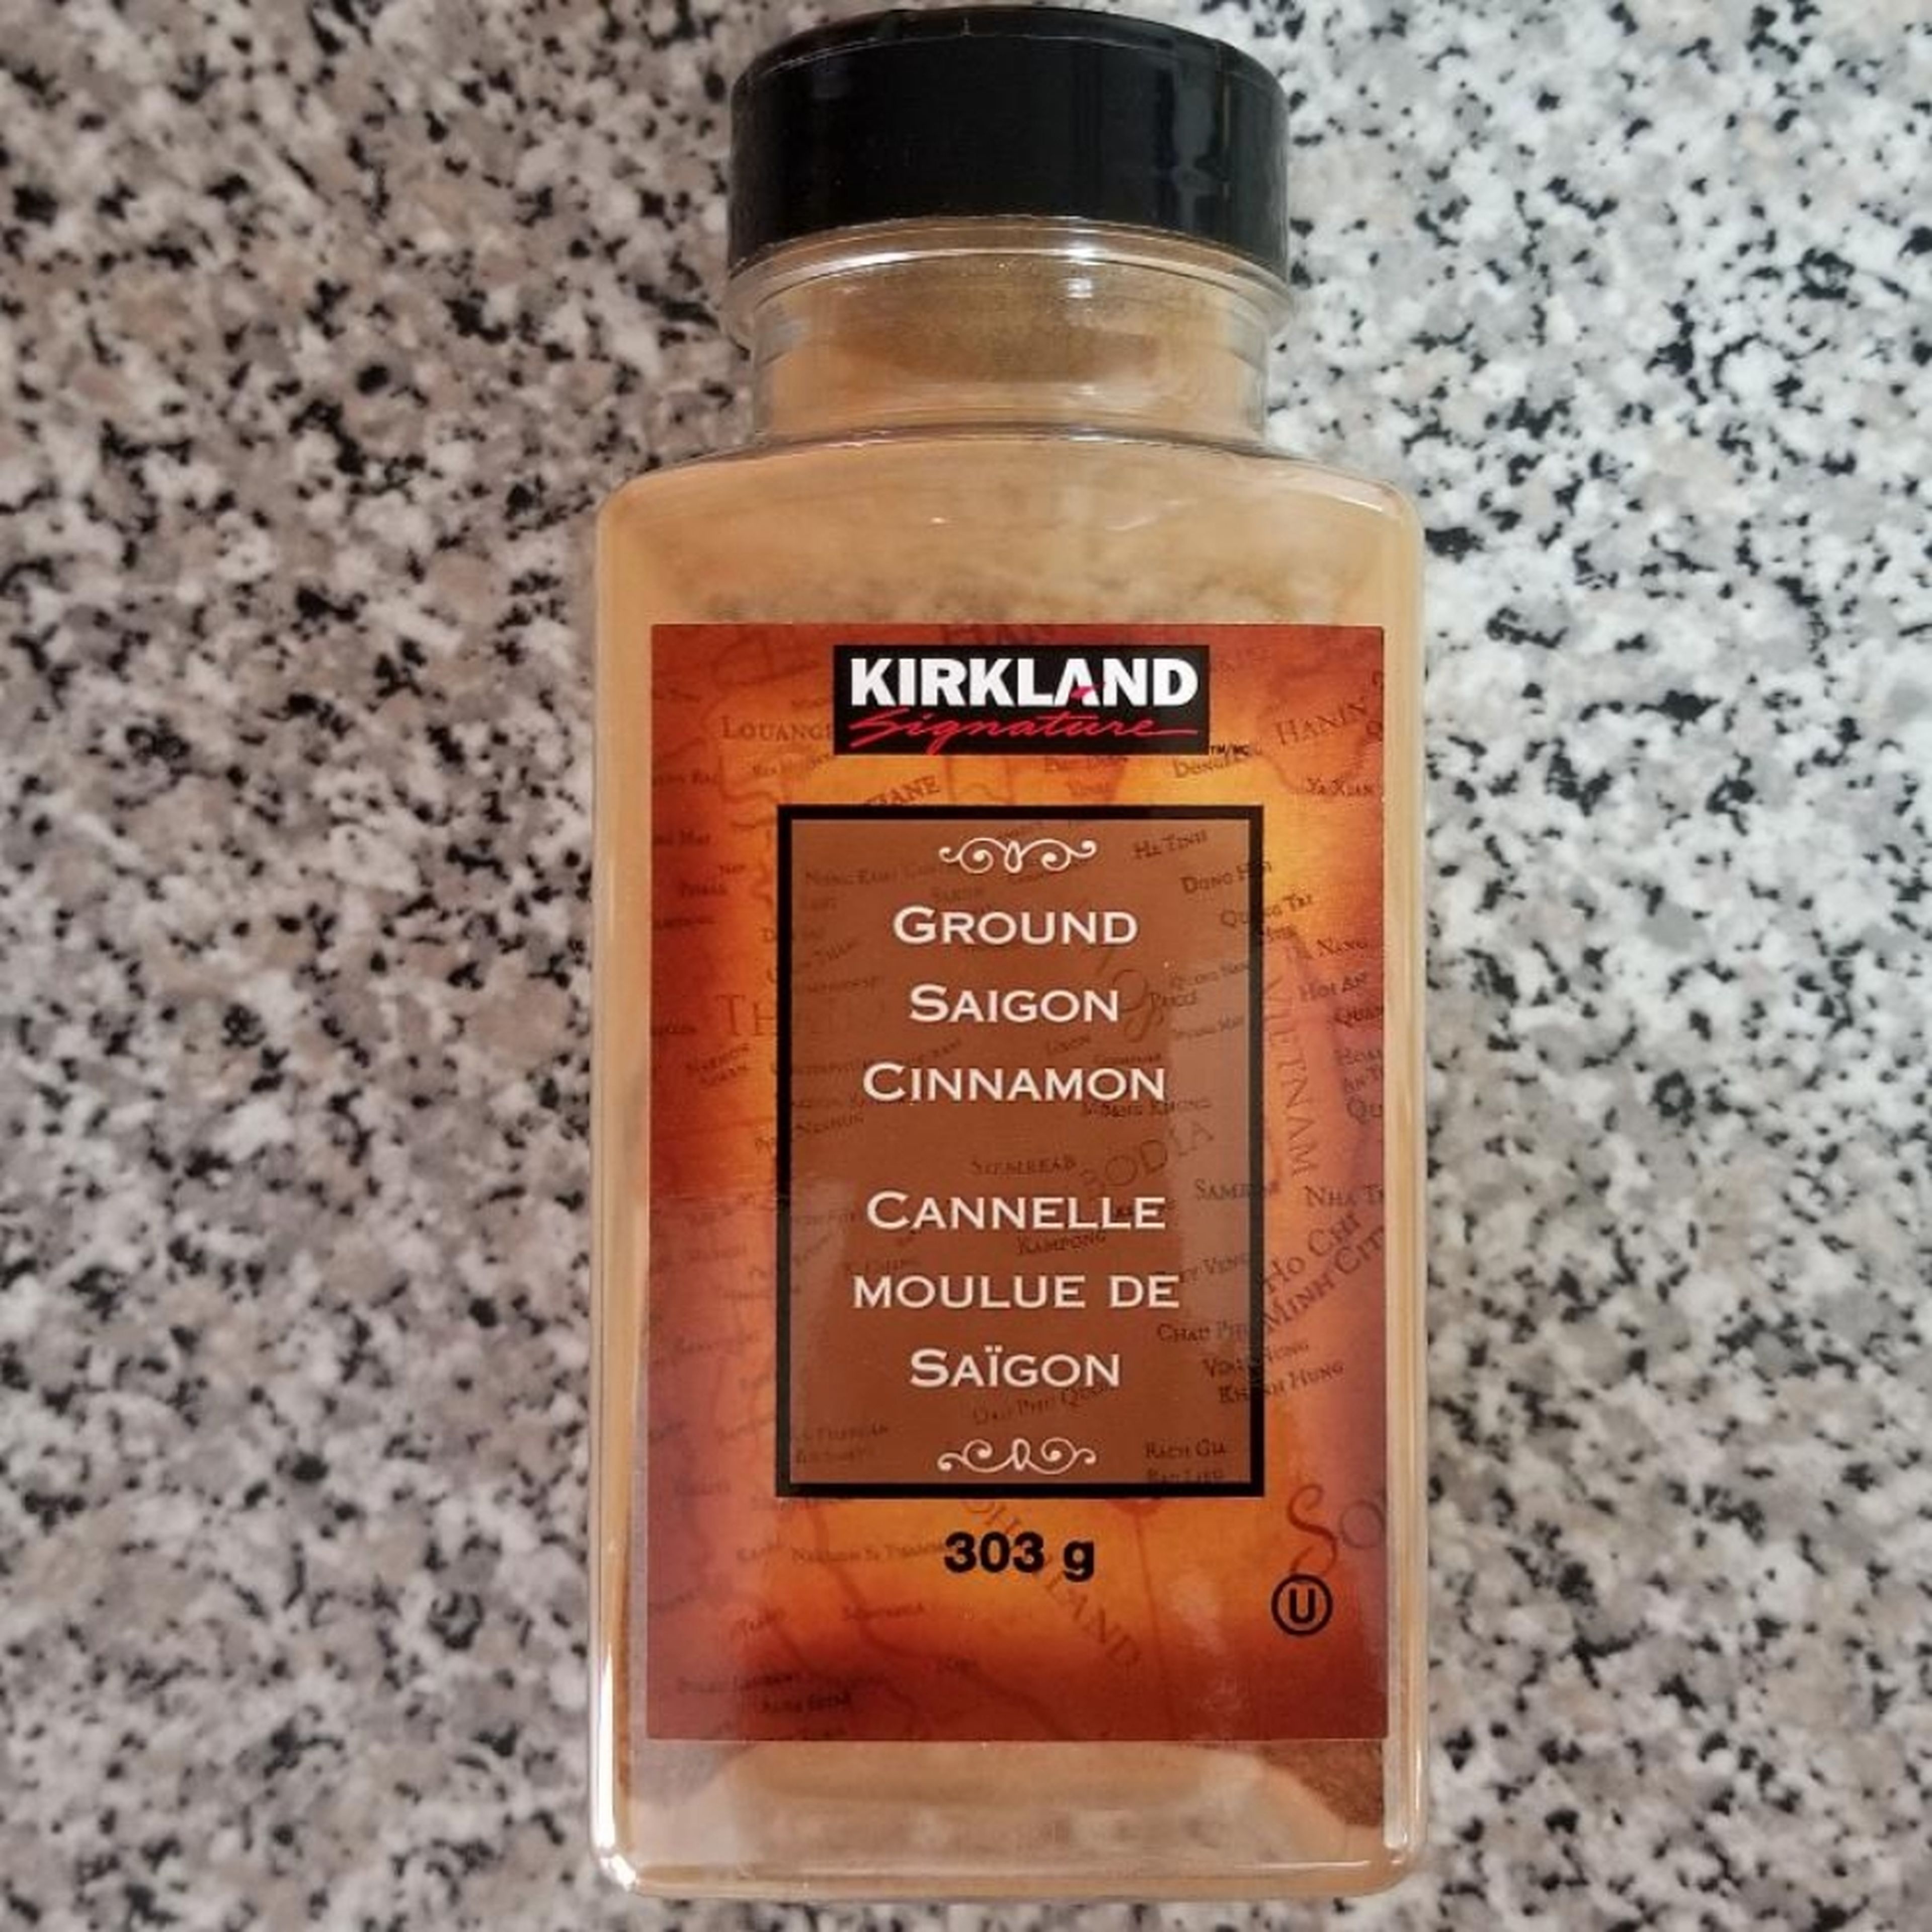 Add 30g ground Cinnamon powder. Available at Costco.